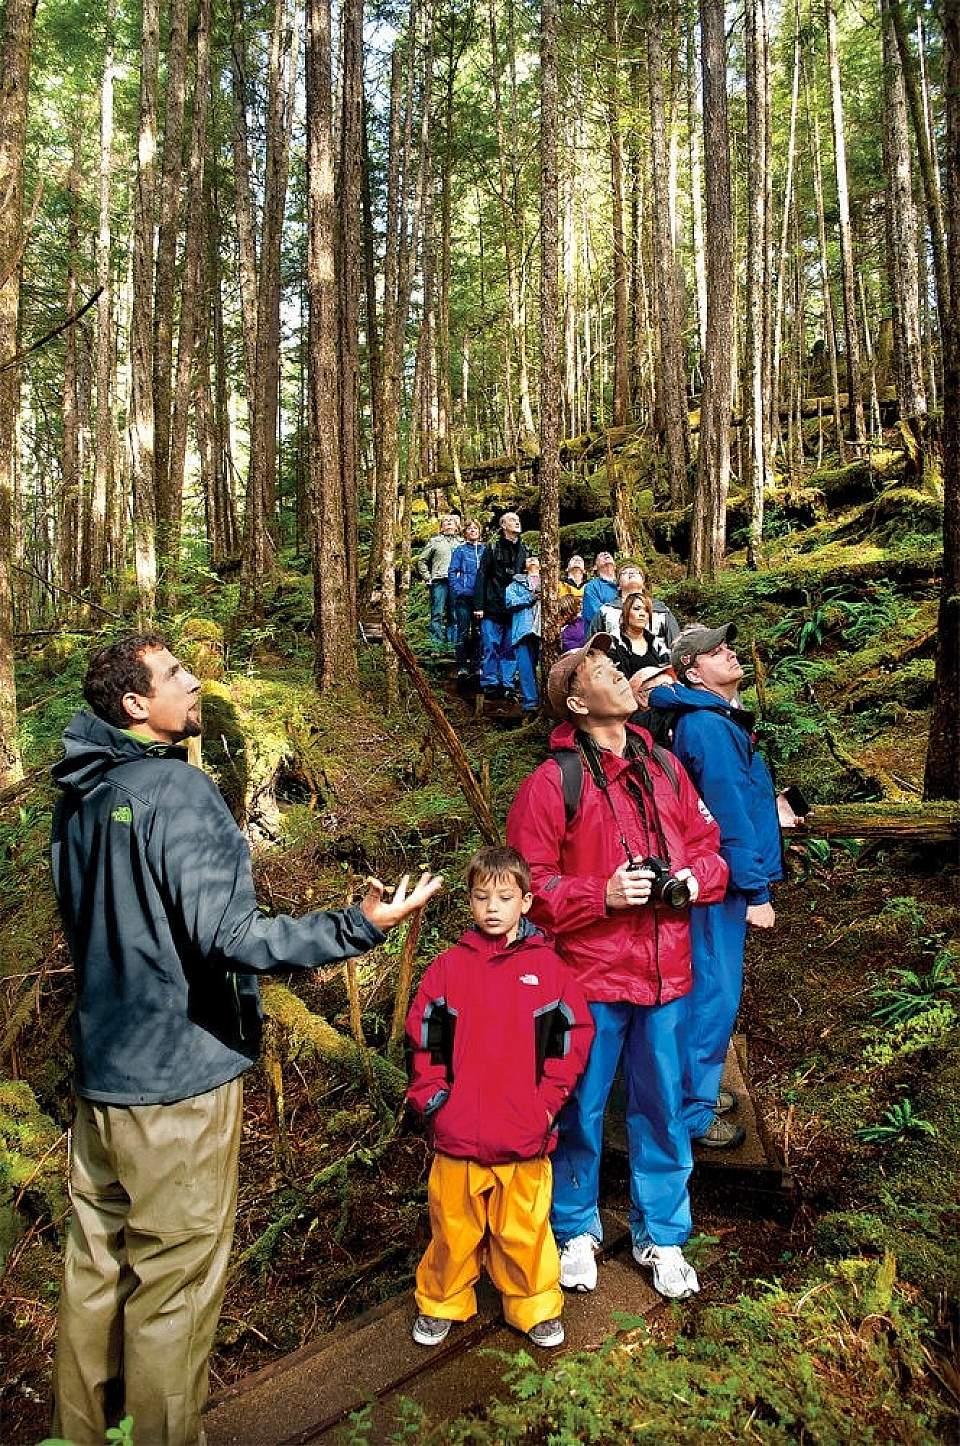 Take a guided walk through an old growth rainforest and marvel at the massive trees